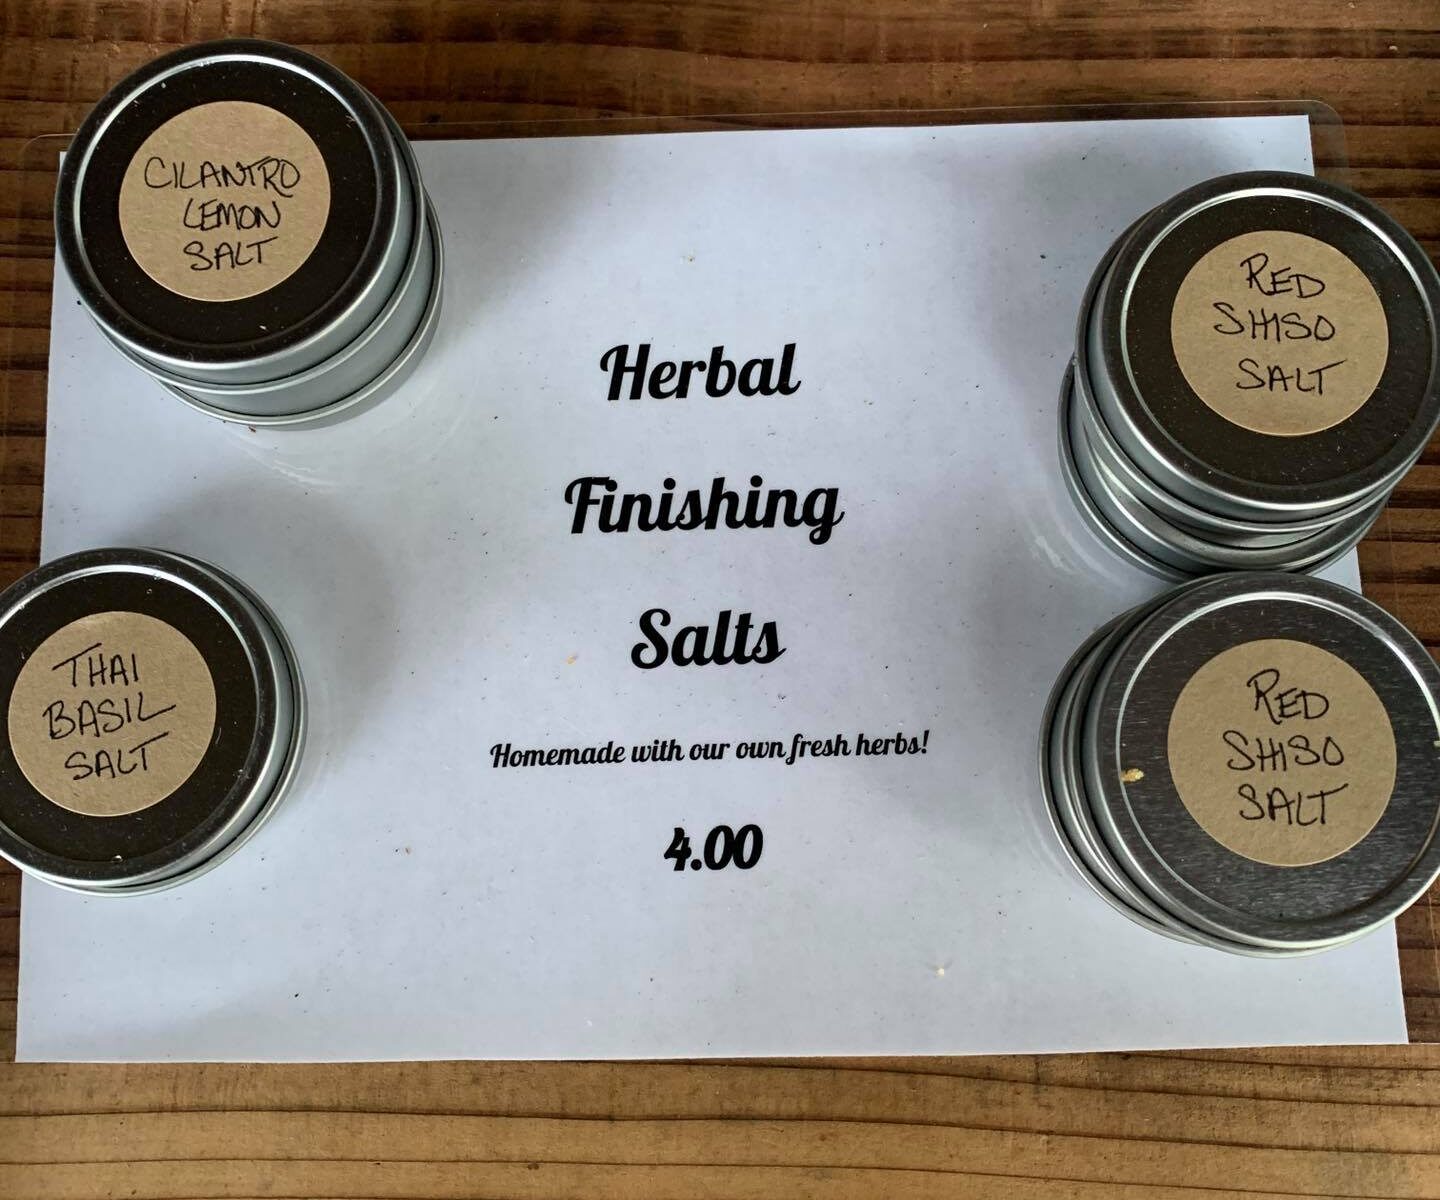 Image of the Herbal Finishing Salts in the stand